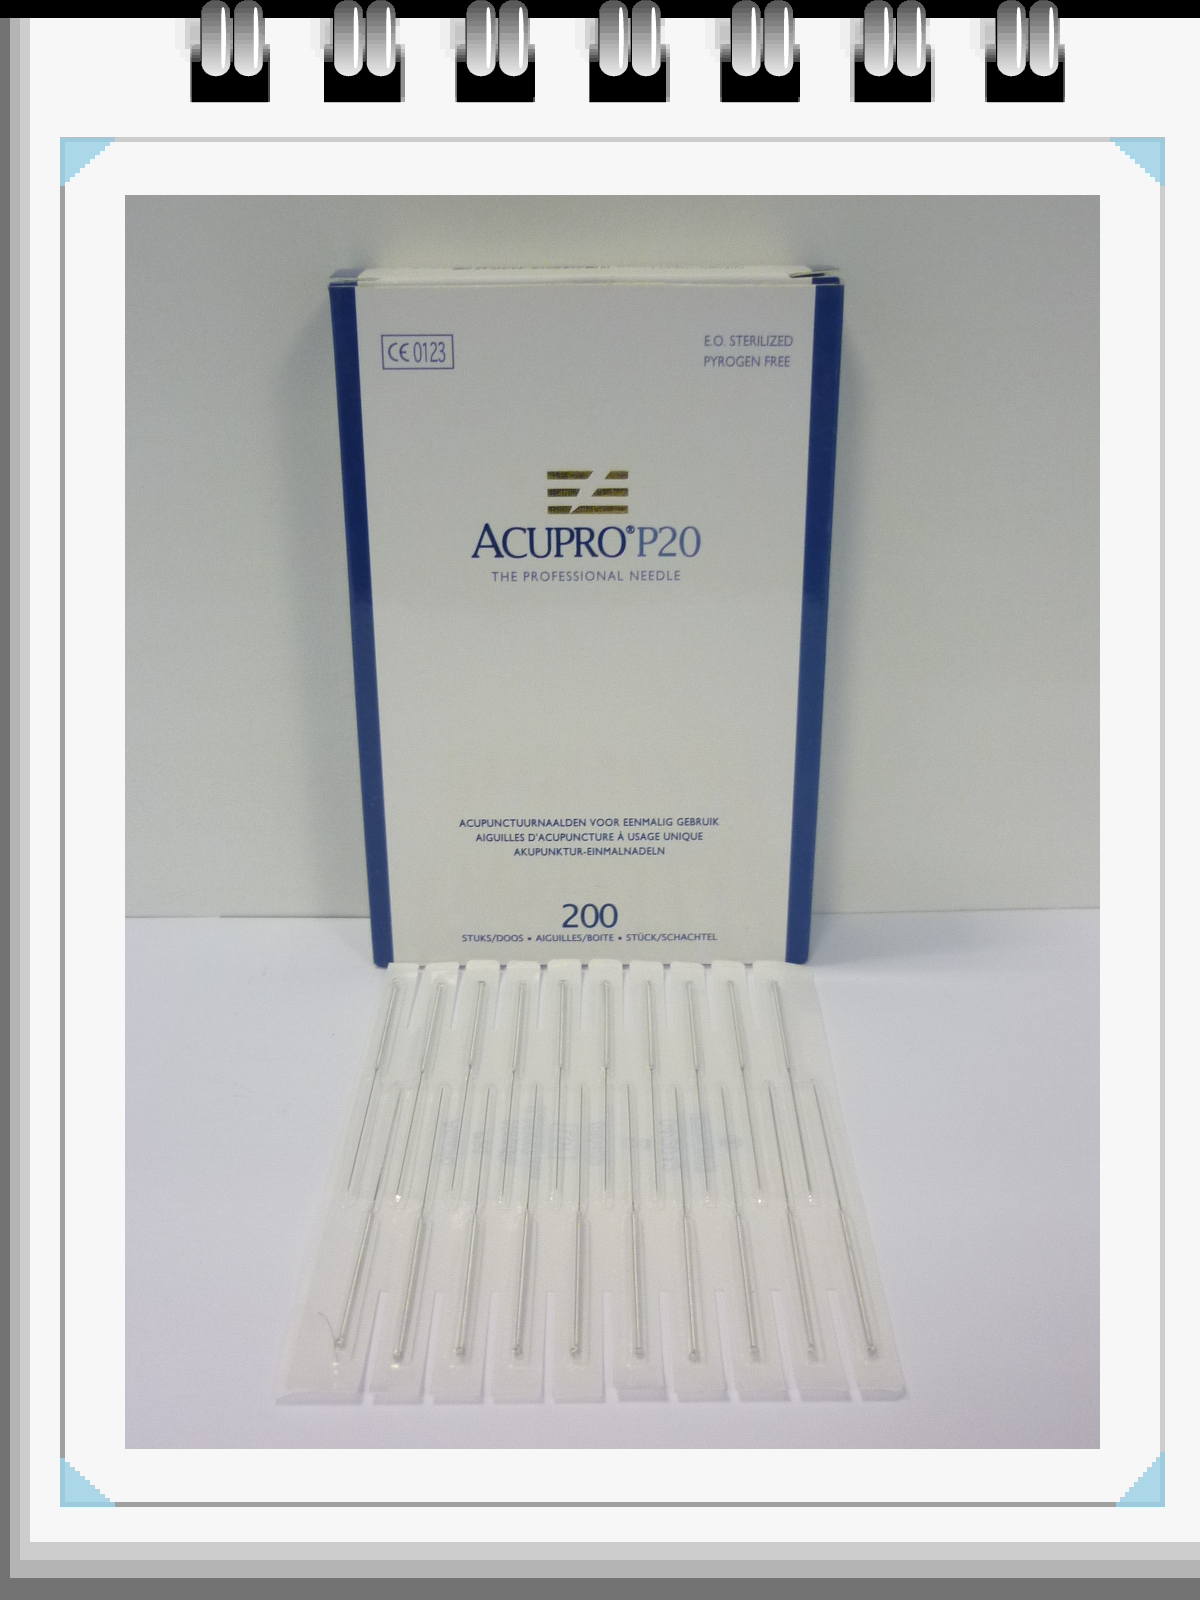 All Products - Acupunctuurnaalden: 0,20 x 40mm, p--200